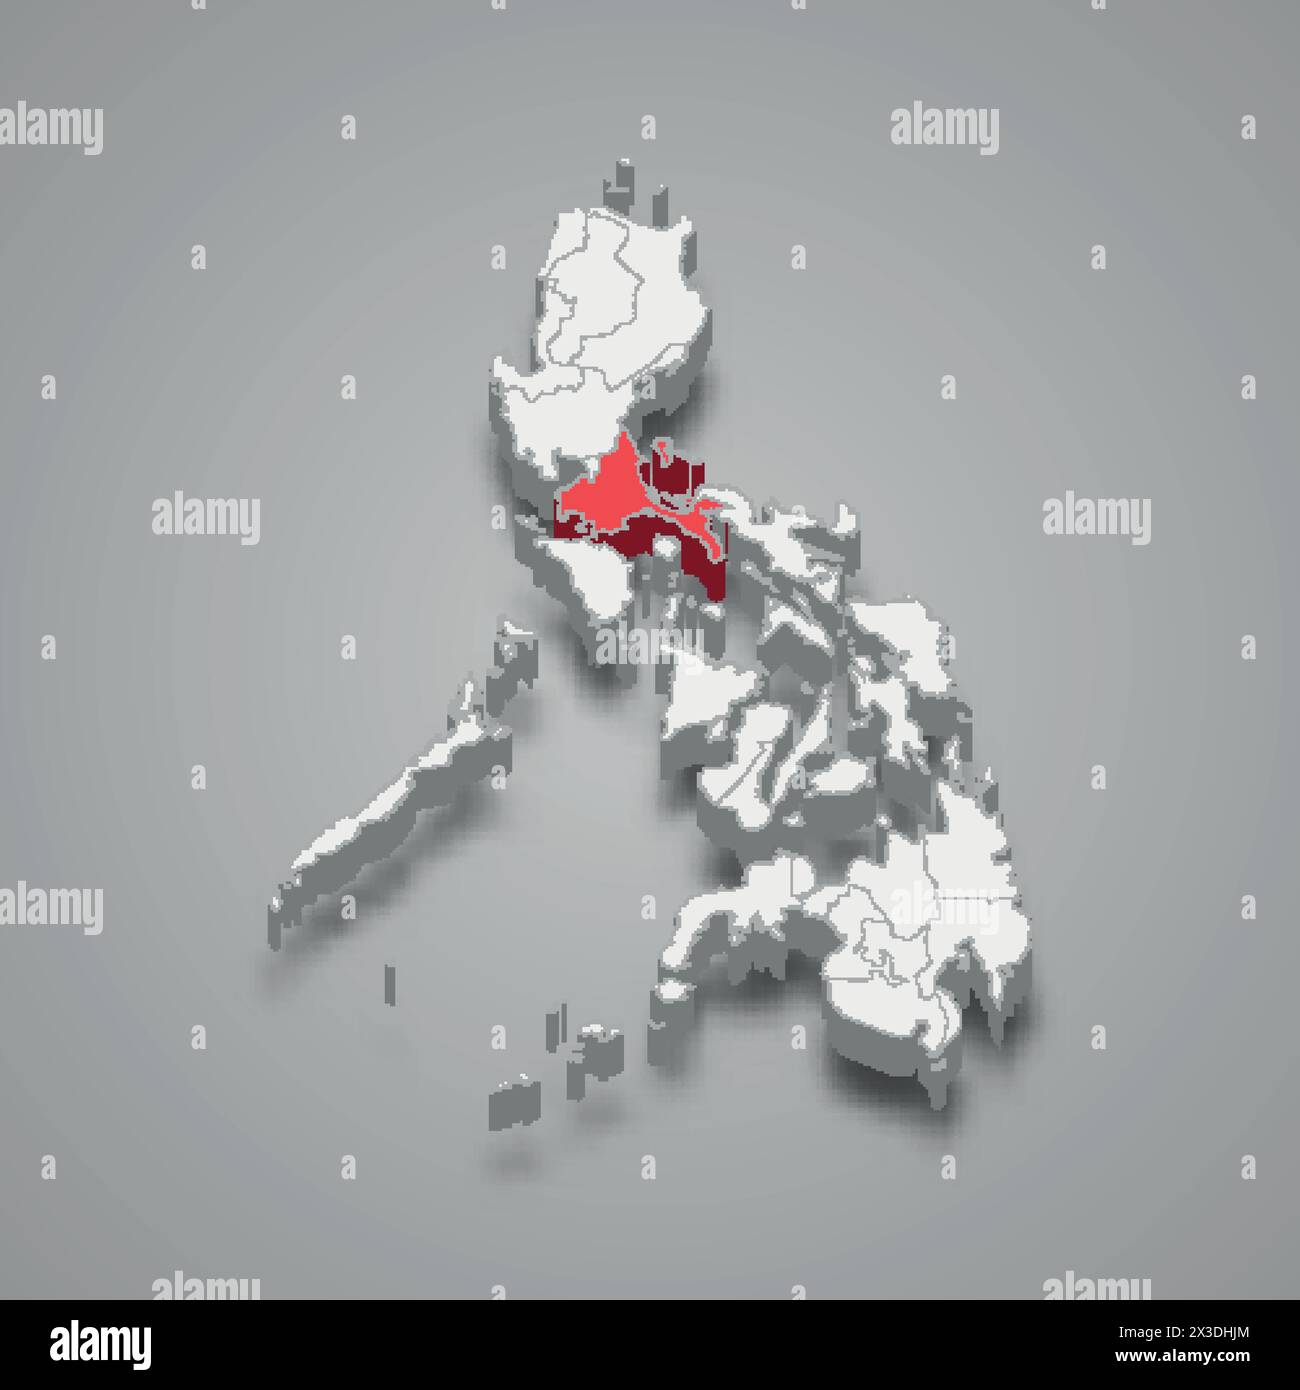 Calabarzon region highlighted in red on a grey Philippines 3d map Stock Vector